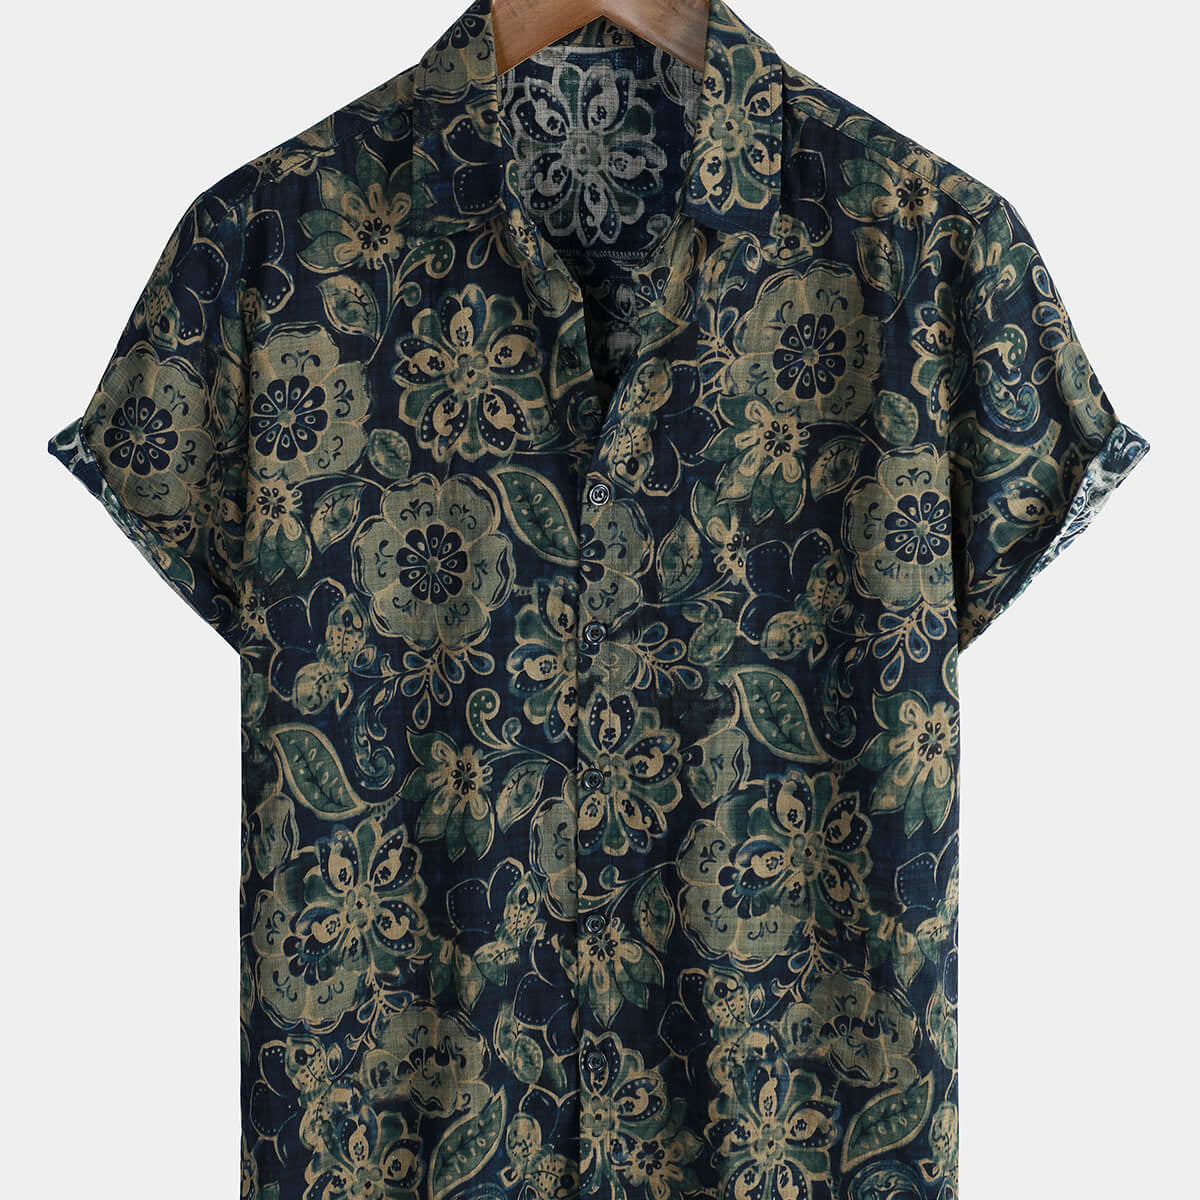 Men's Short Sleeve Casual Holiday Vintage Floral Button Green Cotton Shirt